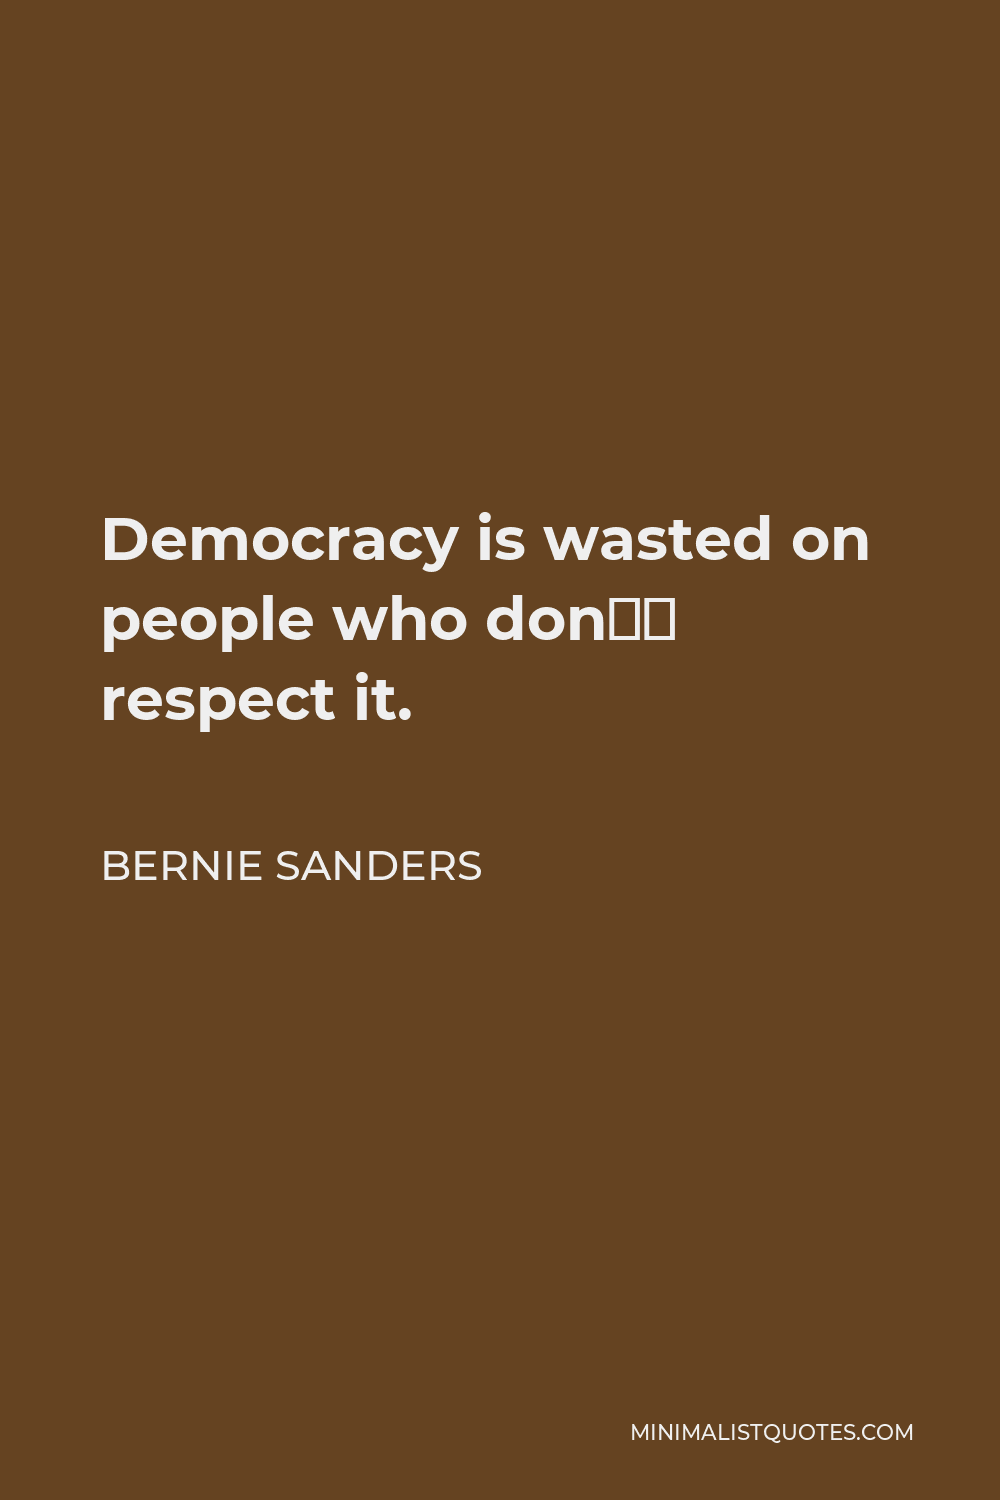 Bernie Sanders Quote - Democracy is wasted on people who don’t respect it.